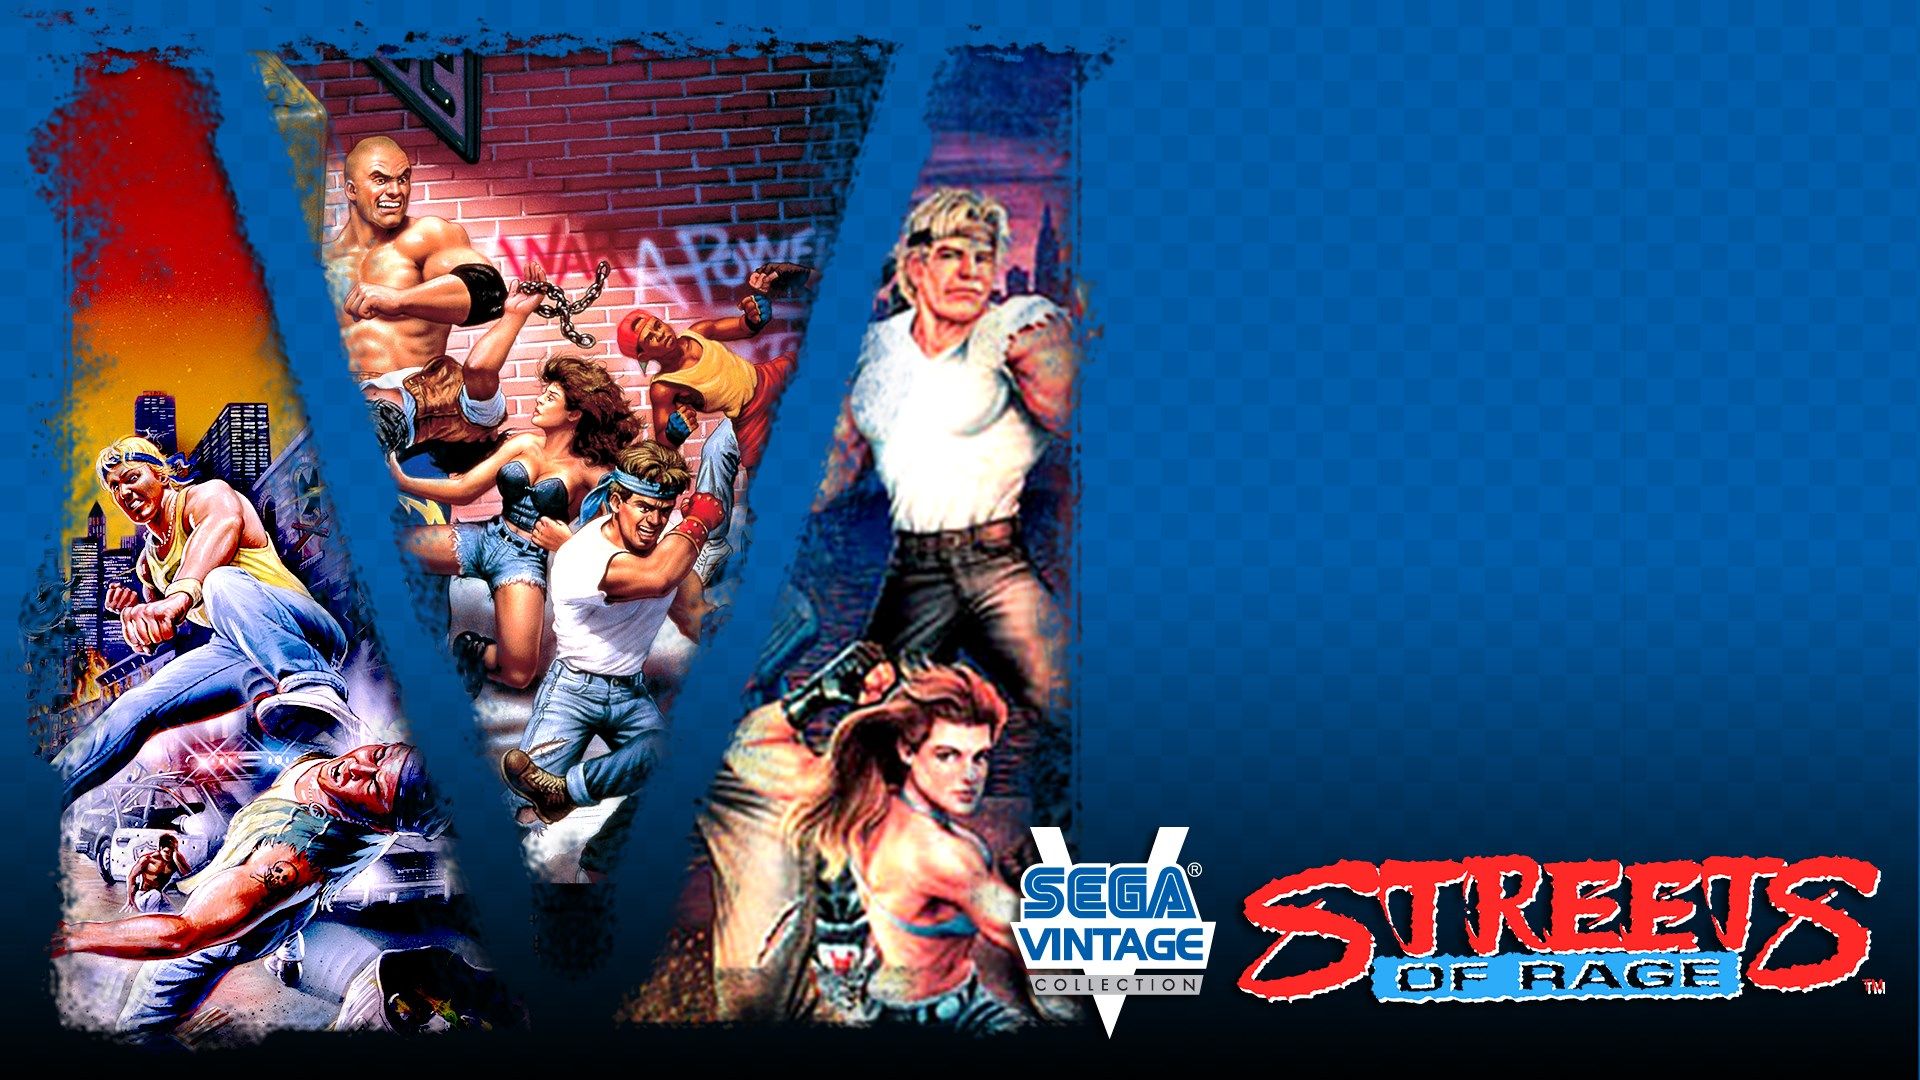 streets of rage remake 5.1 android